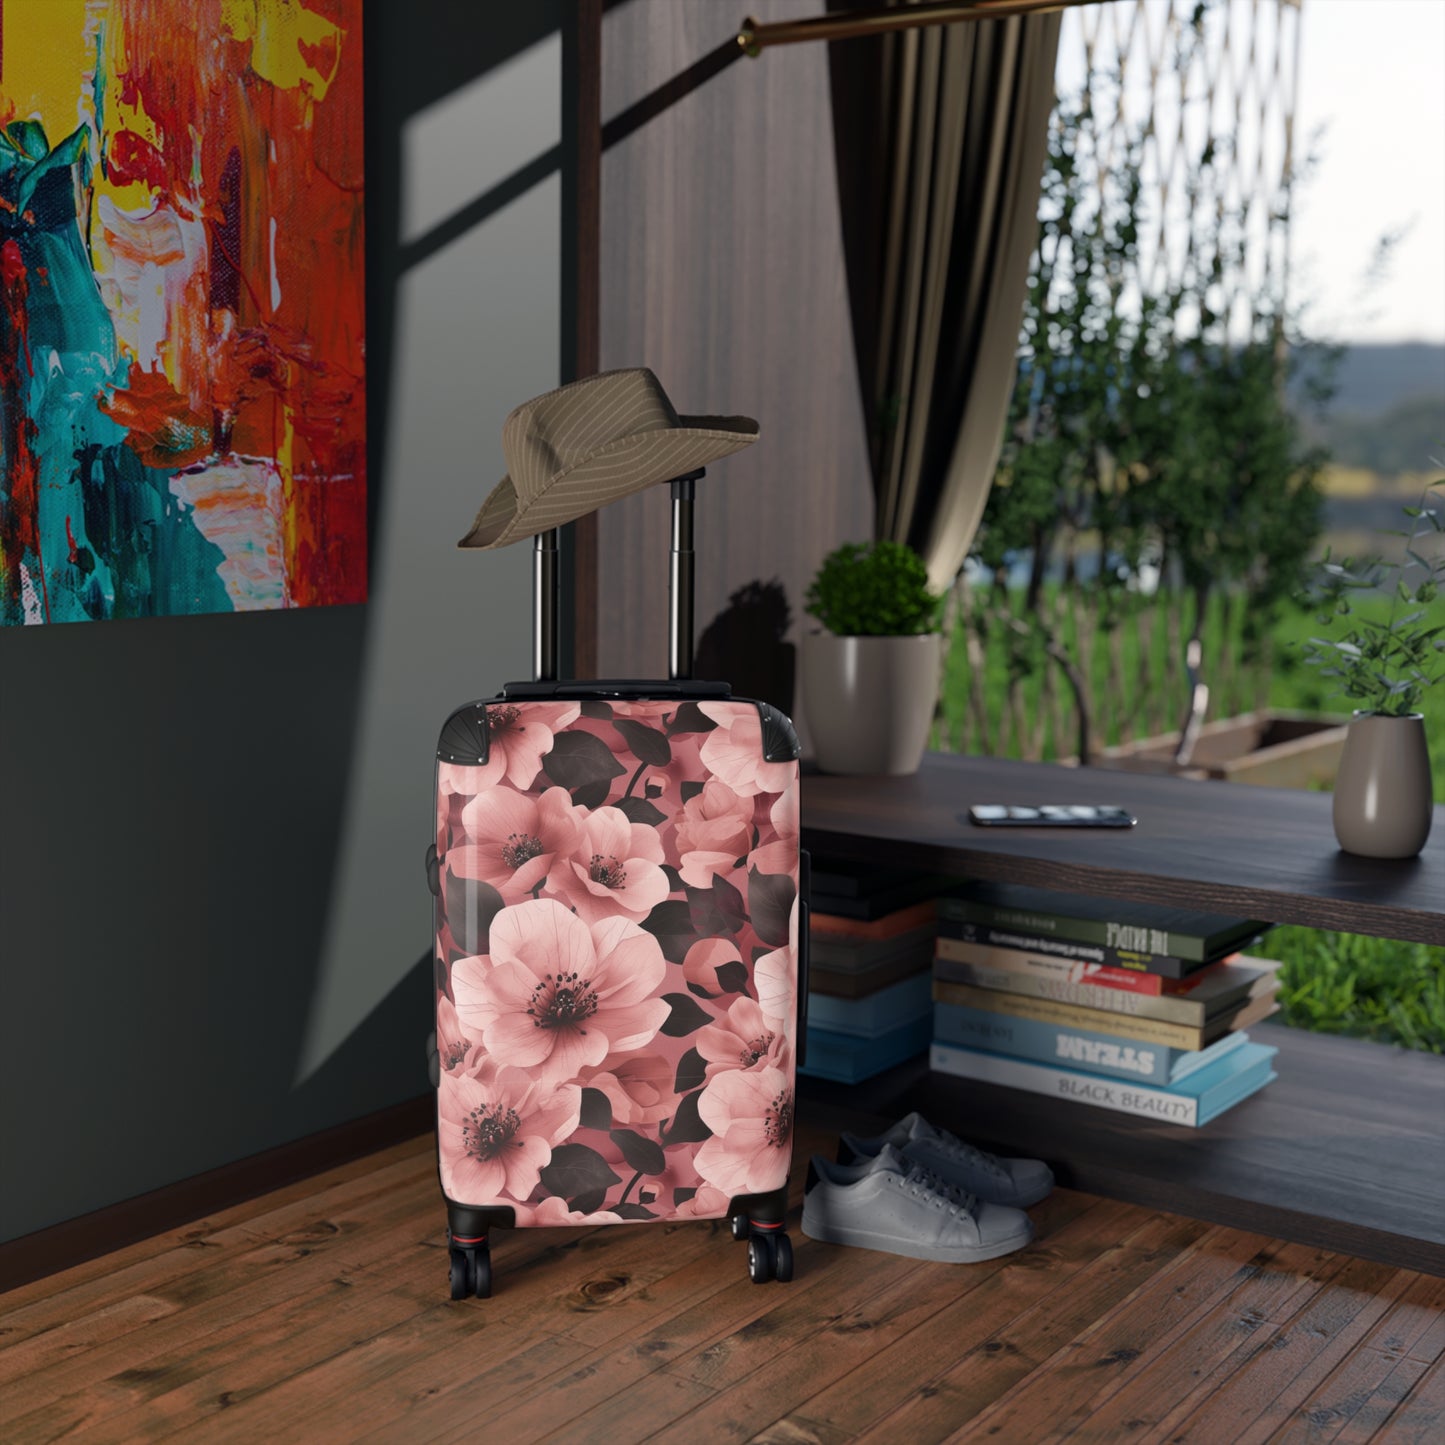 Floral Inspired Stylish & Unique Hard-Shell Suitcase: Durable, Lightweight, Expandable Luggage with 360° Swivel Wheels & Secure Lock for Fashion-Forward Travelers, Free US Shipping